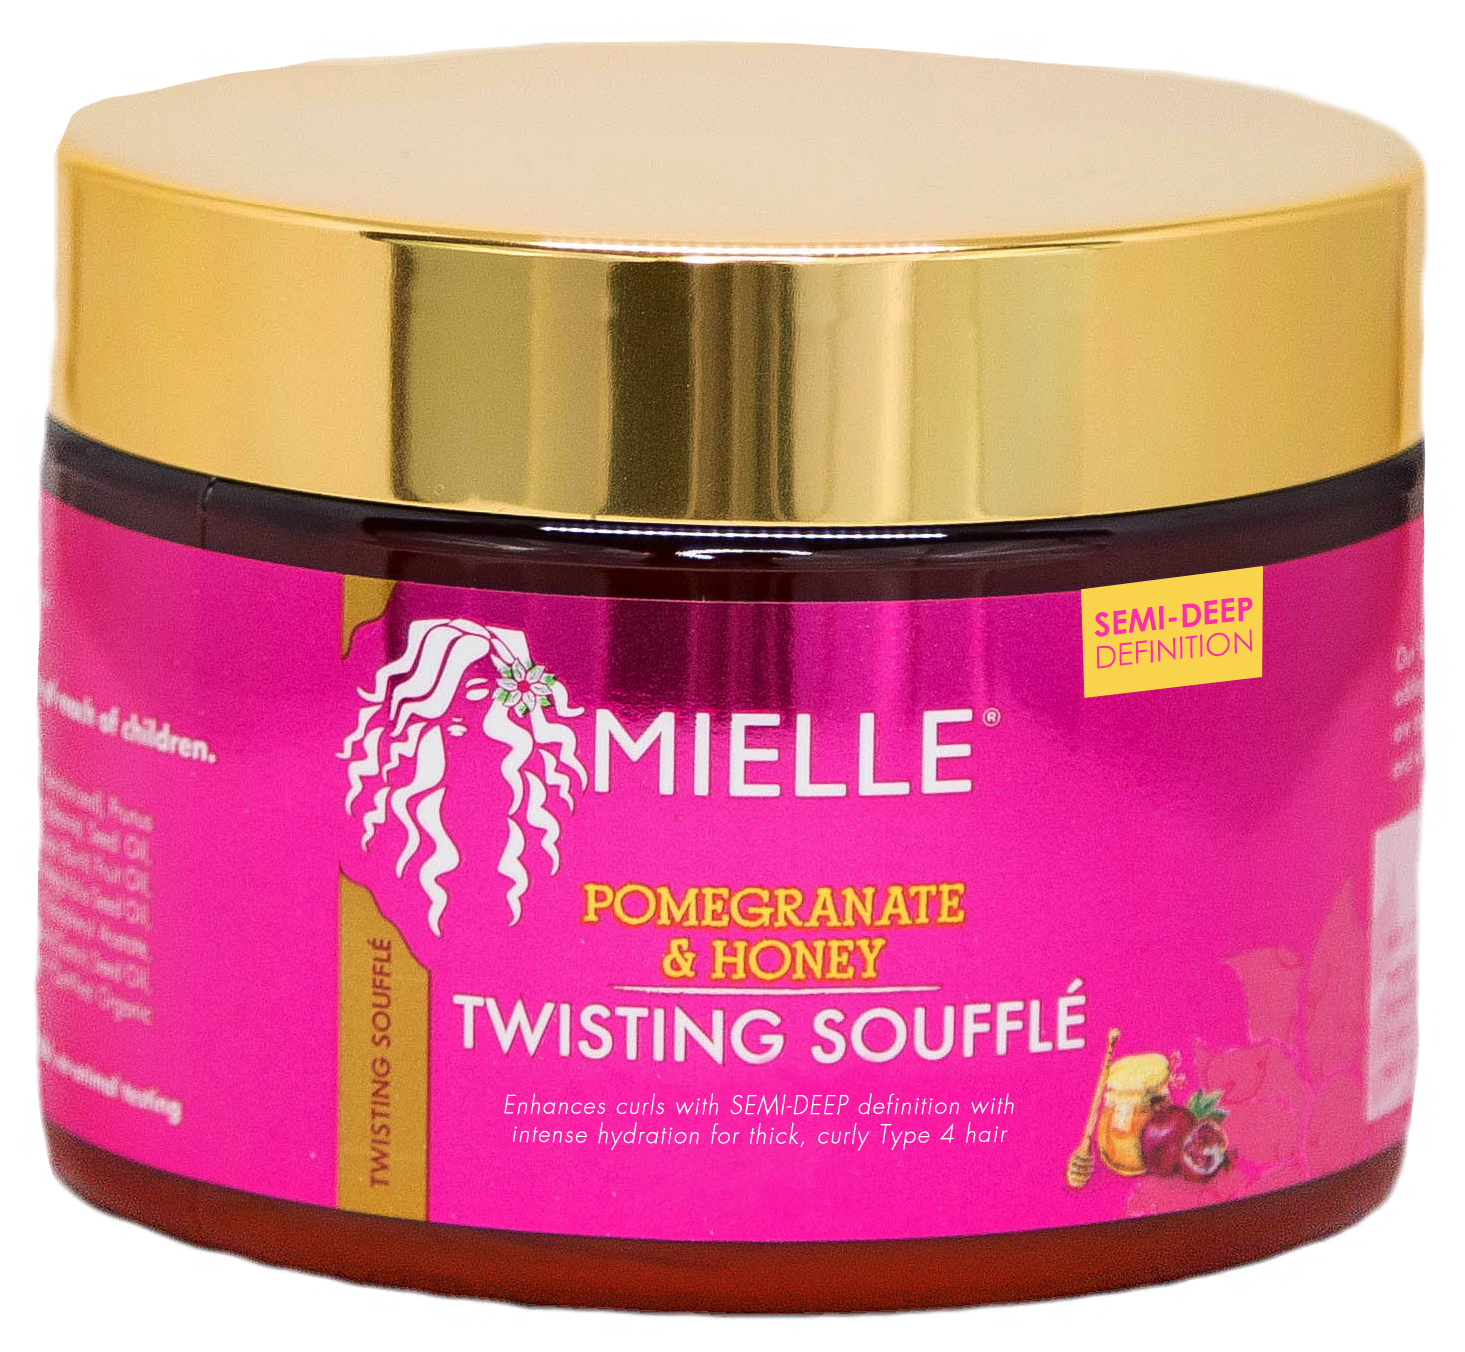 Mielle Pomegranate and Honey Twisting Souflee